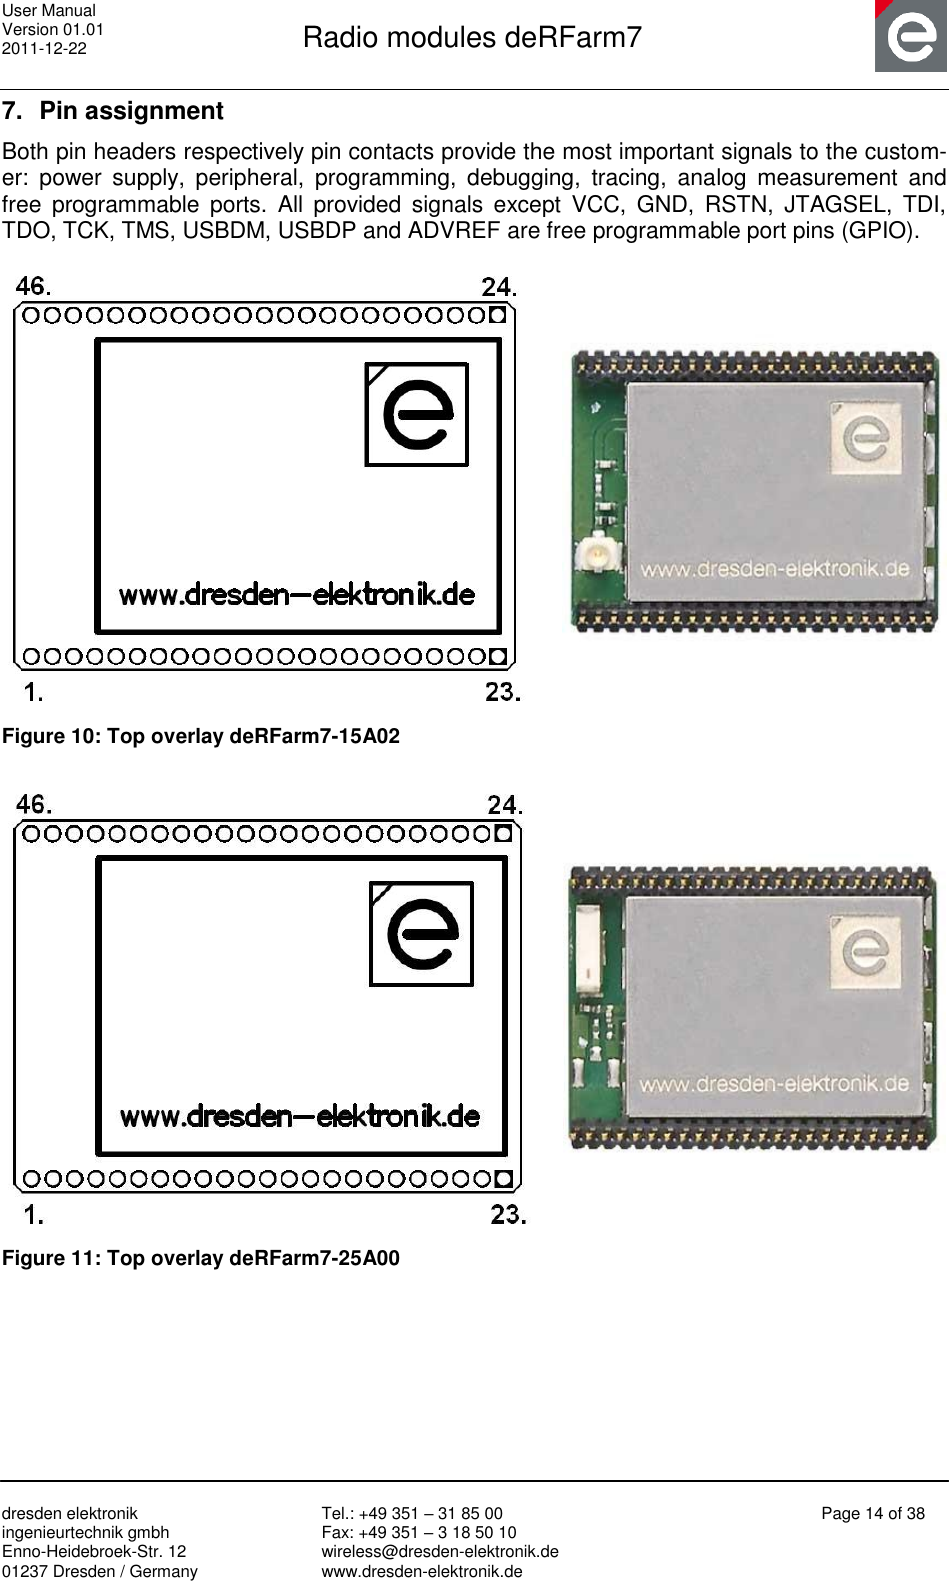 User Manual Version 01.01 2011-12-22       Radio modules deRFarm7       dresden elektronik ingenieurtechnik gmbh Enno-Heidebroek-Str. 12 01237 Dresden / Germany Tel.: +49 351 – 31 85 00 Fax: +49 351 – 3 18 50 10 wireless@dresden-elektronik.de www.dresden-elektronik.de Page 14 of 38  7.  Pin assignment Both pin headers respectively pin contacts provide the most important signals to the custom-er:  power  supply,  peripheral,  programming,  debugging,  tracing,  analog  measurement  and free  programmable  ports.  All  provided  signals  except  VCC,  GND,  RSTN,  JTAGSEL,  TDI, TDO, TCK, TMS, USBDM, USBDP and ADVREF are free programmable port pins (GPIO).     Figure 10: Top overlay deRFarm7-15A02    Figure 11: Top overlay deRFarm7-25A00  